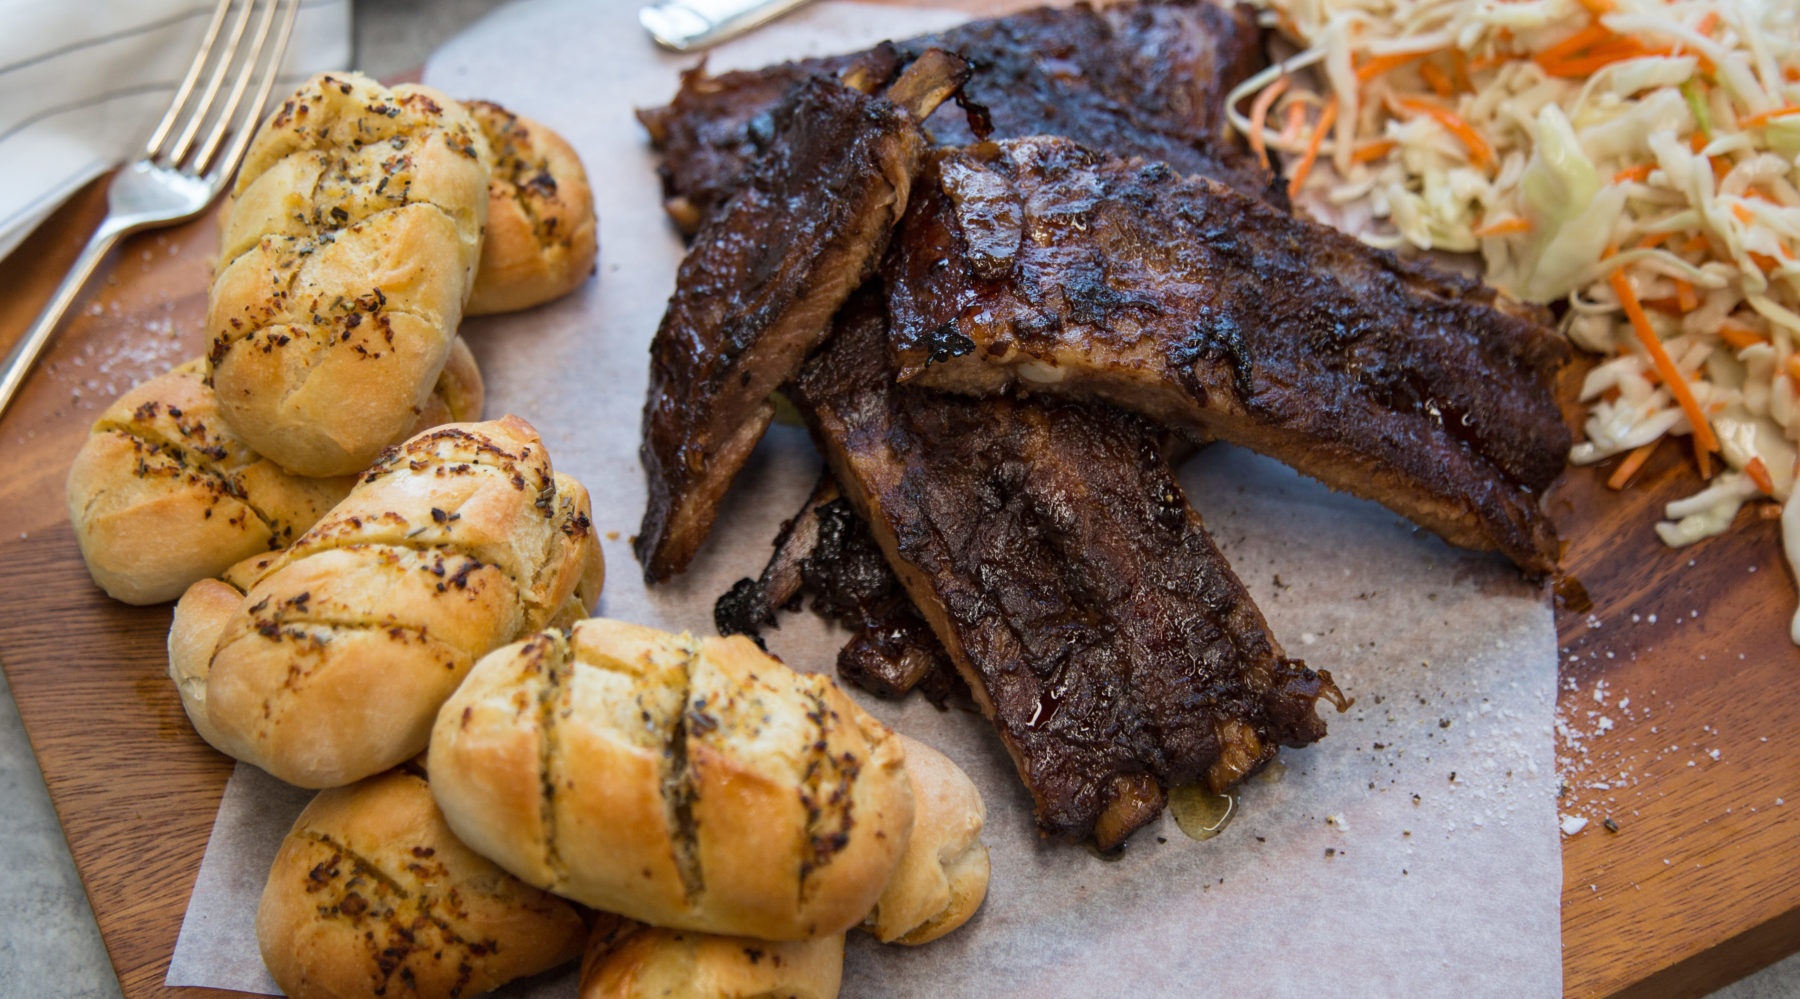 Cooked ribs and mini garlic breads and slaw on a board.